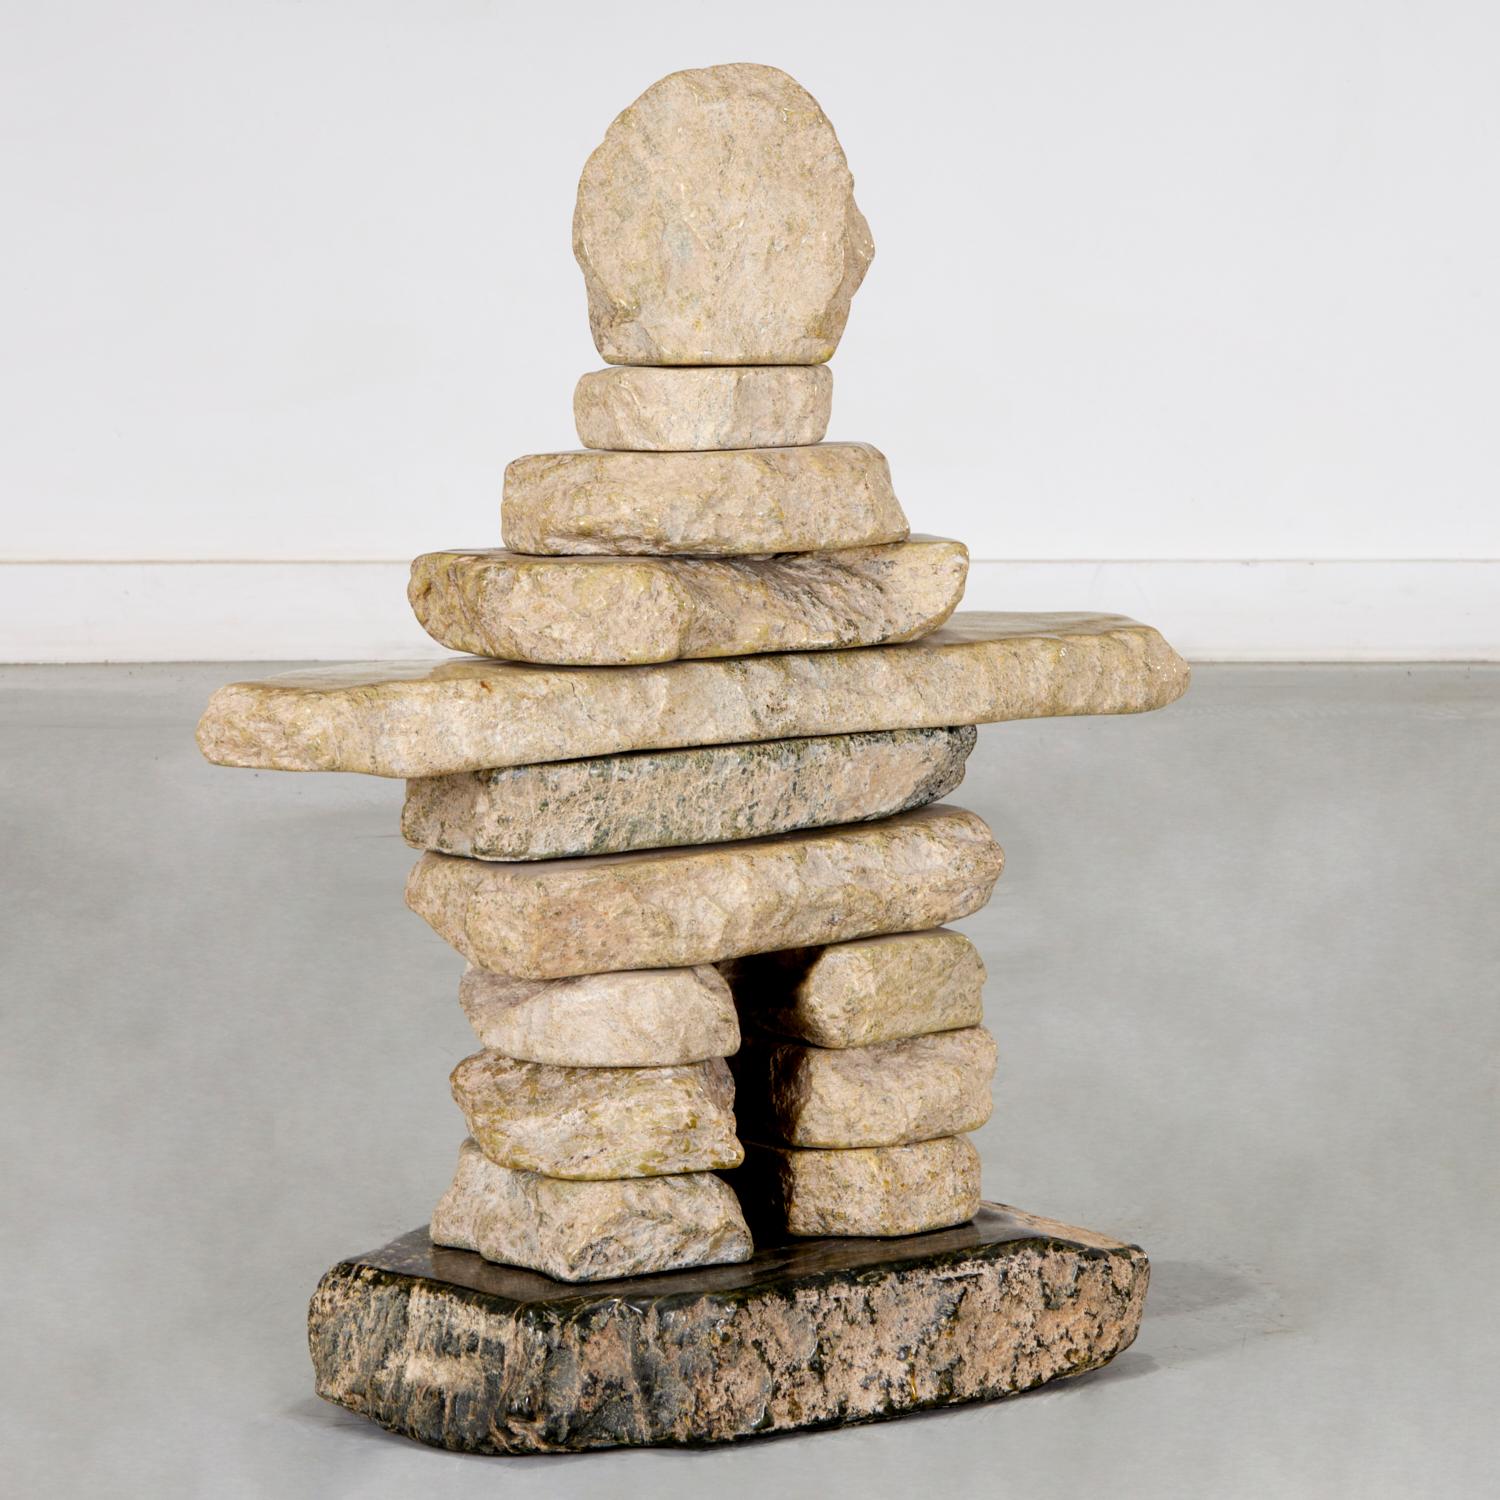 20th c., Pacific Northwest, a large stacked stone Inuit Peoples Inuksuk in the form of a human, on a polished stone base. The underside of the stacked stones are polished while the top and sides remain in their original rough form.

This Inuksuk is